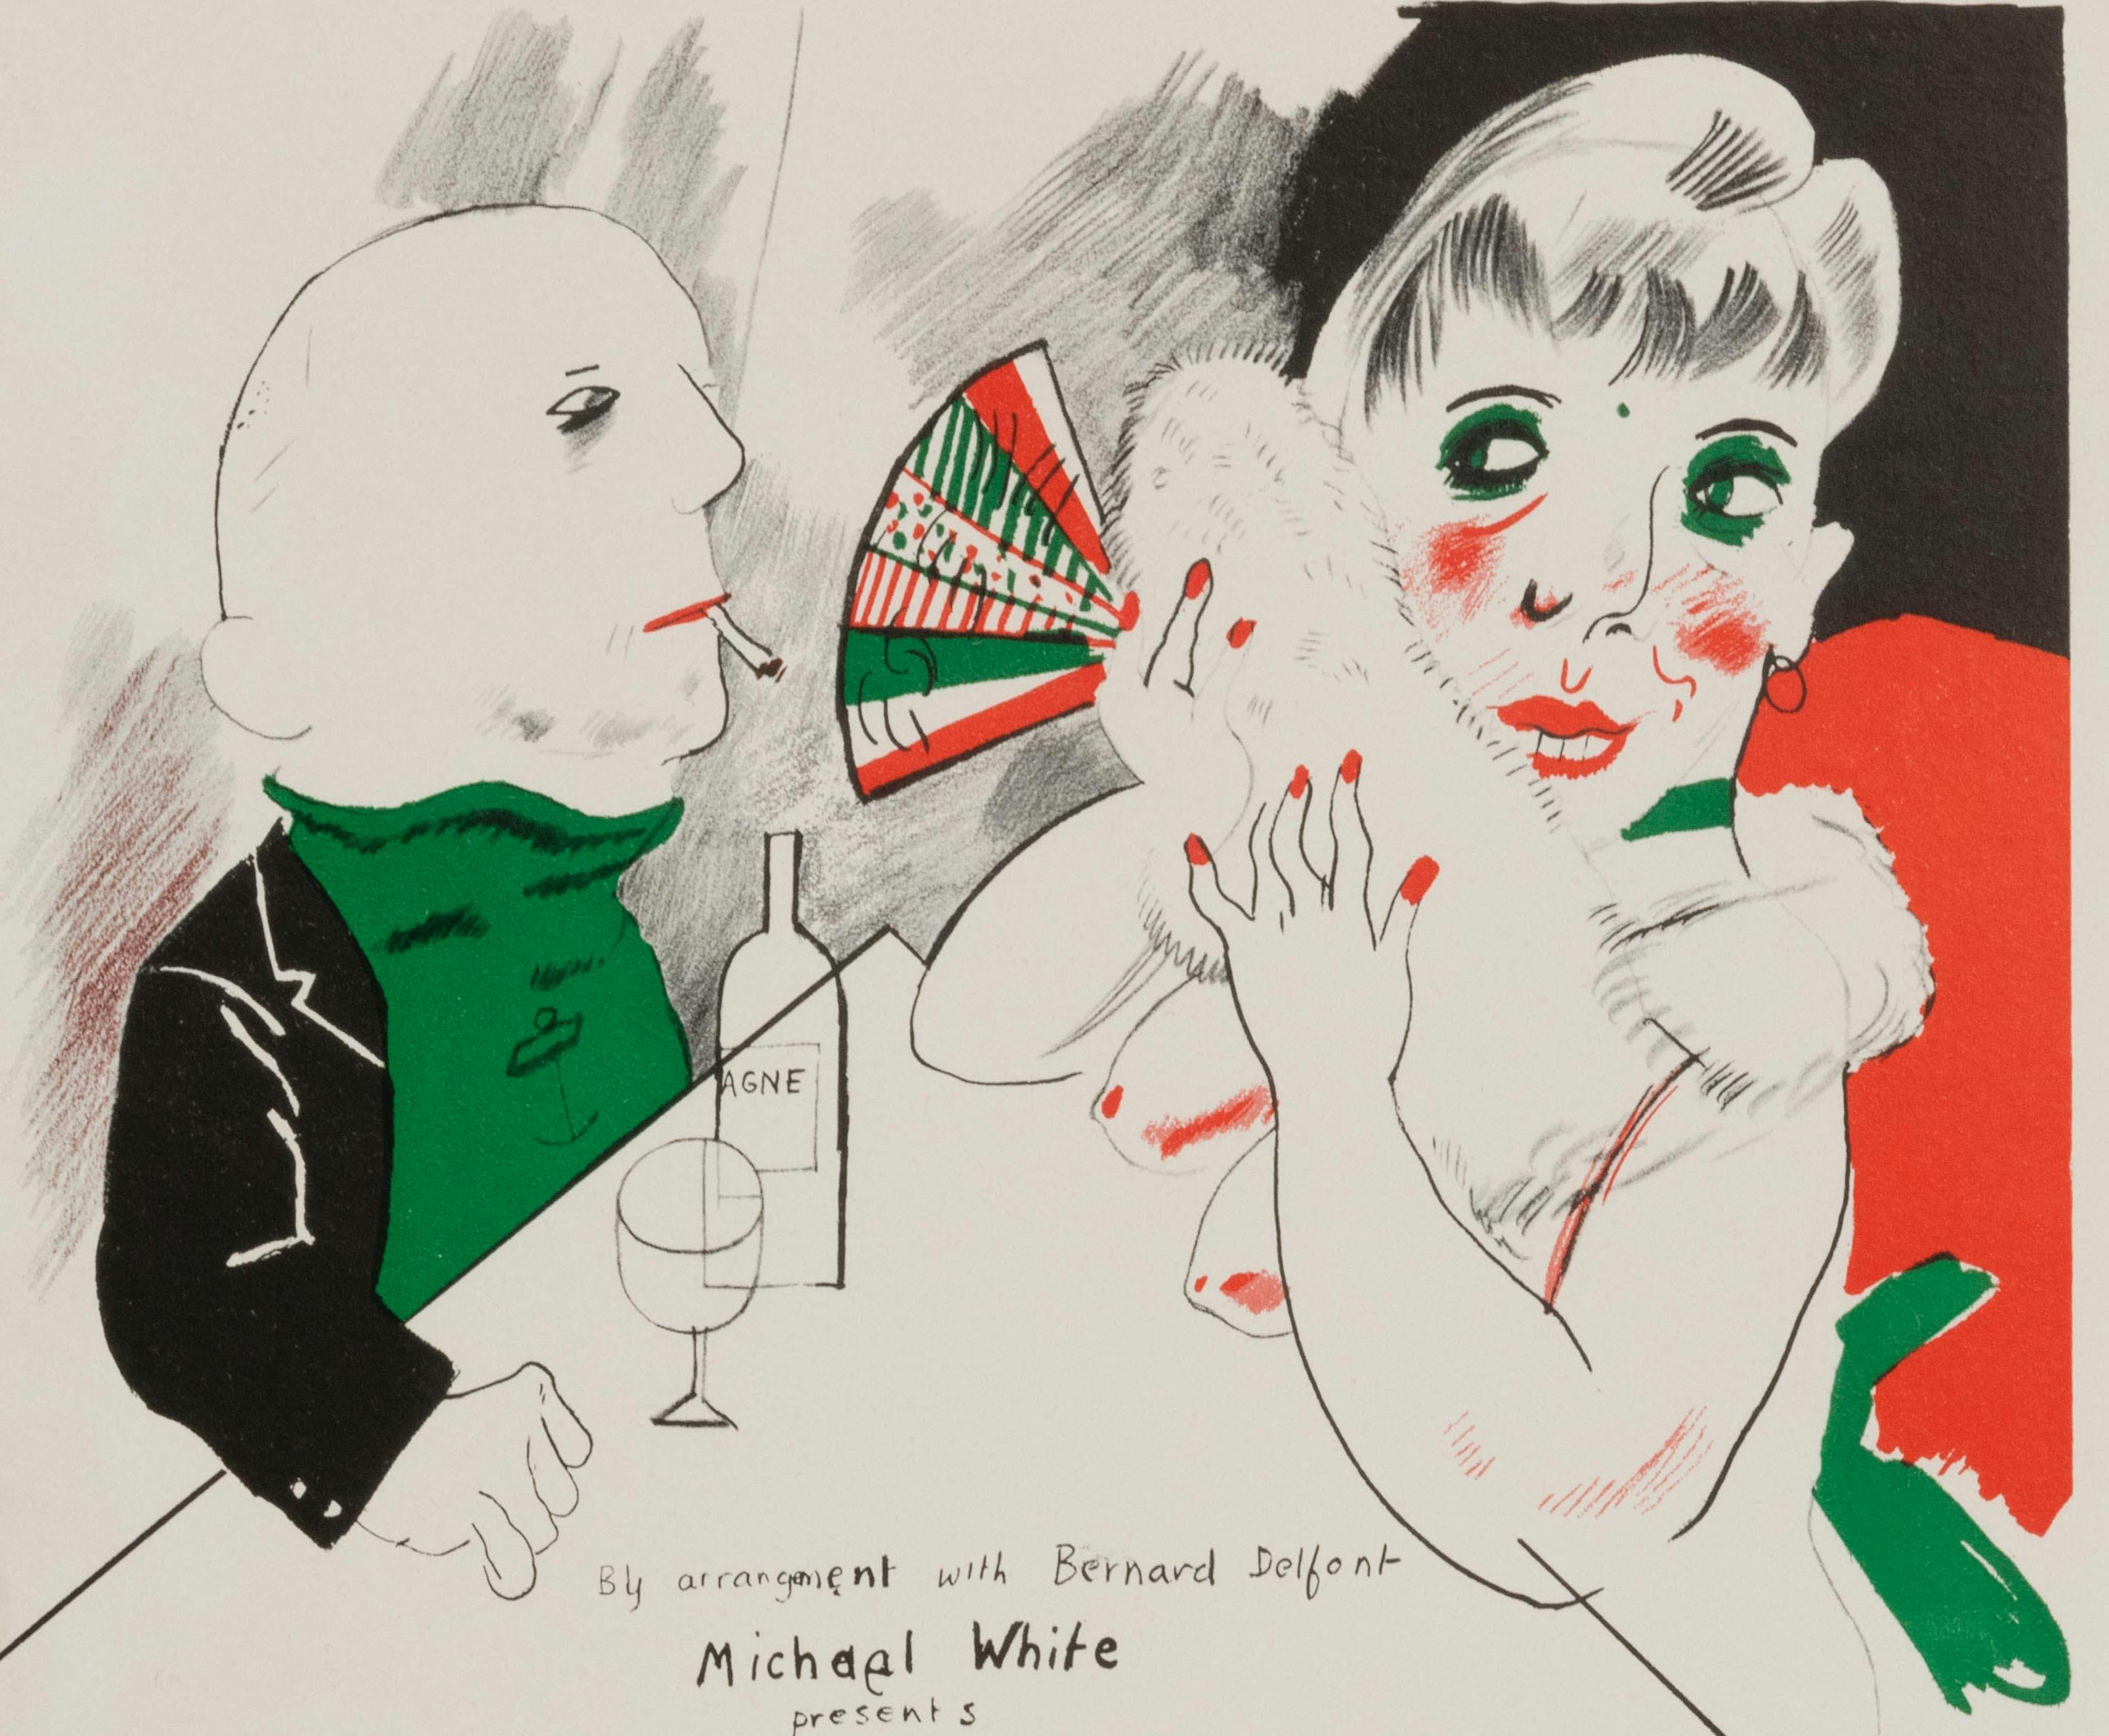 Detail of The ThreePenny Opera, rare theatre poster by David Hockney, 1972